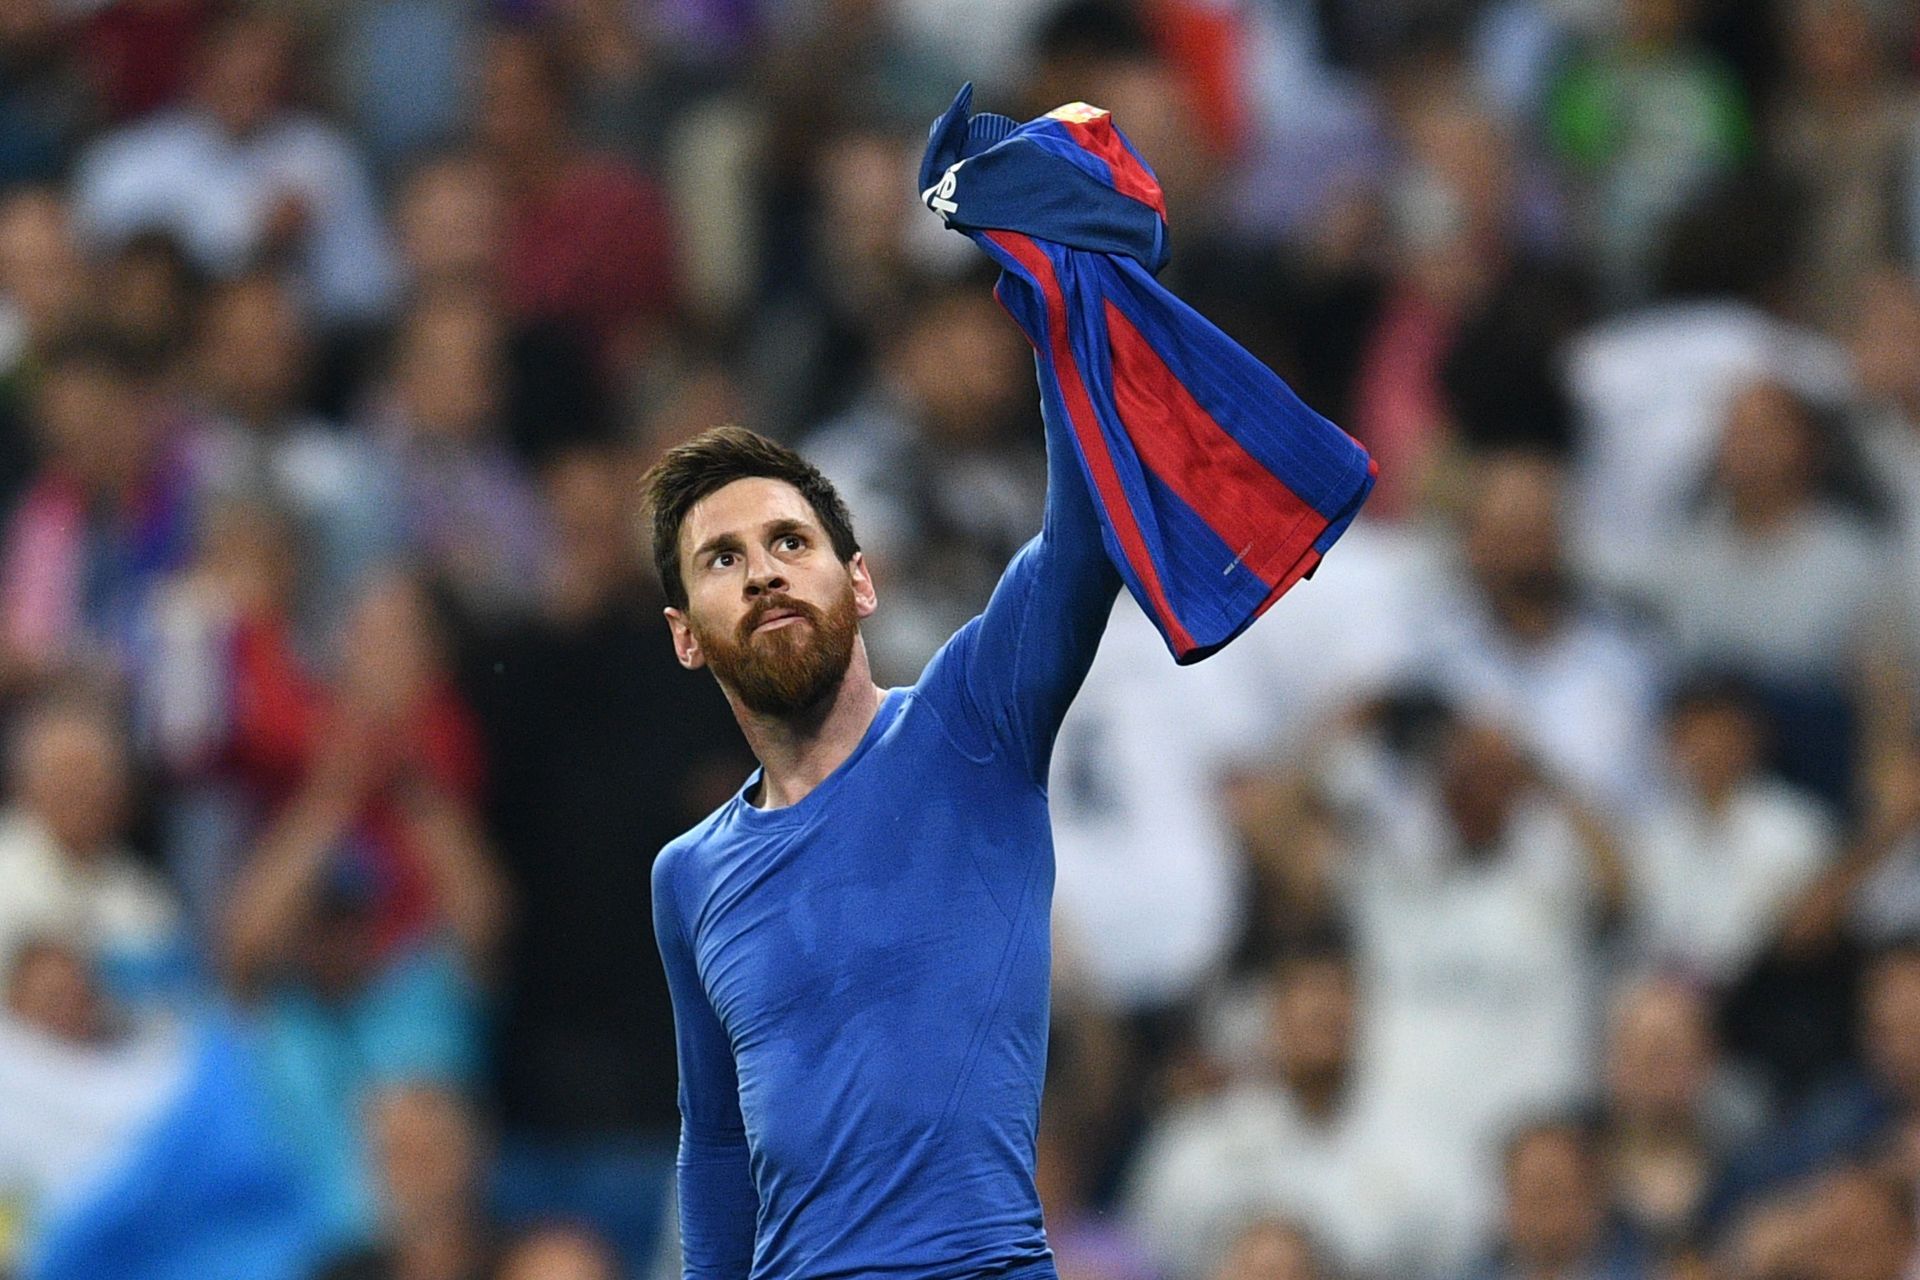 Lionel Messi is the greatest goalscorer in El Clasico history.